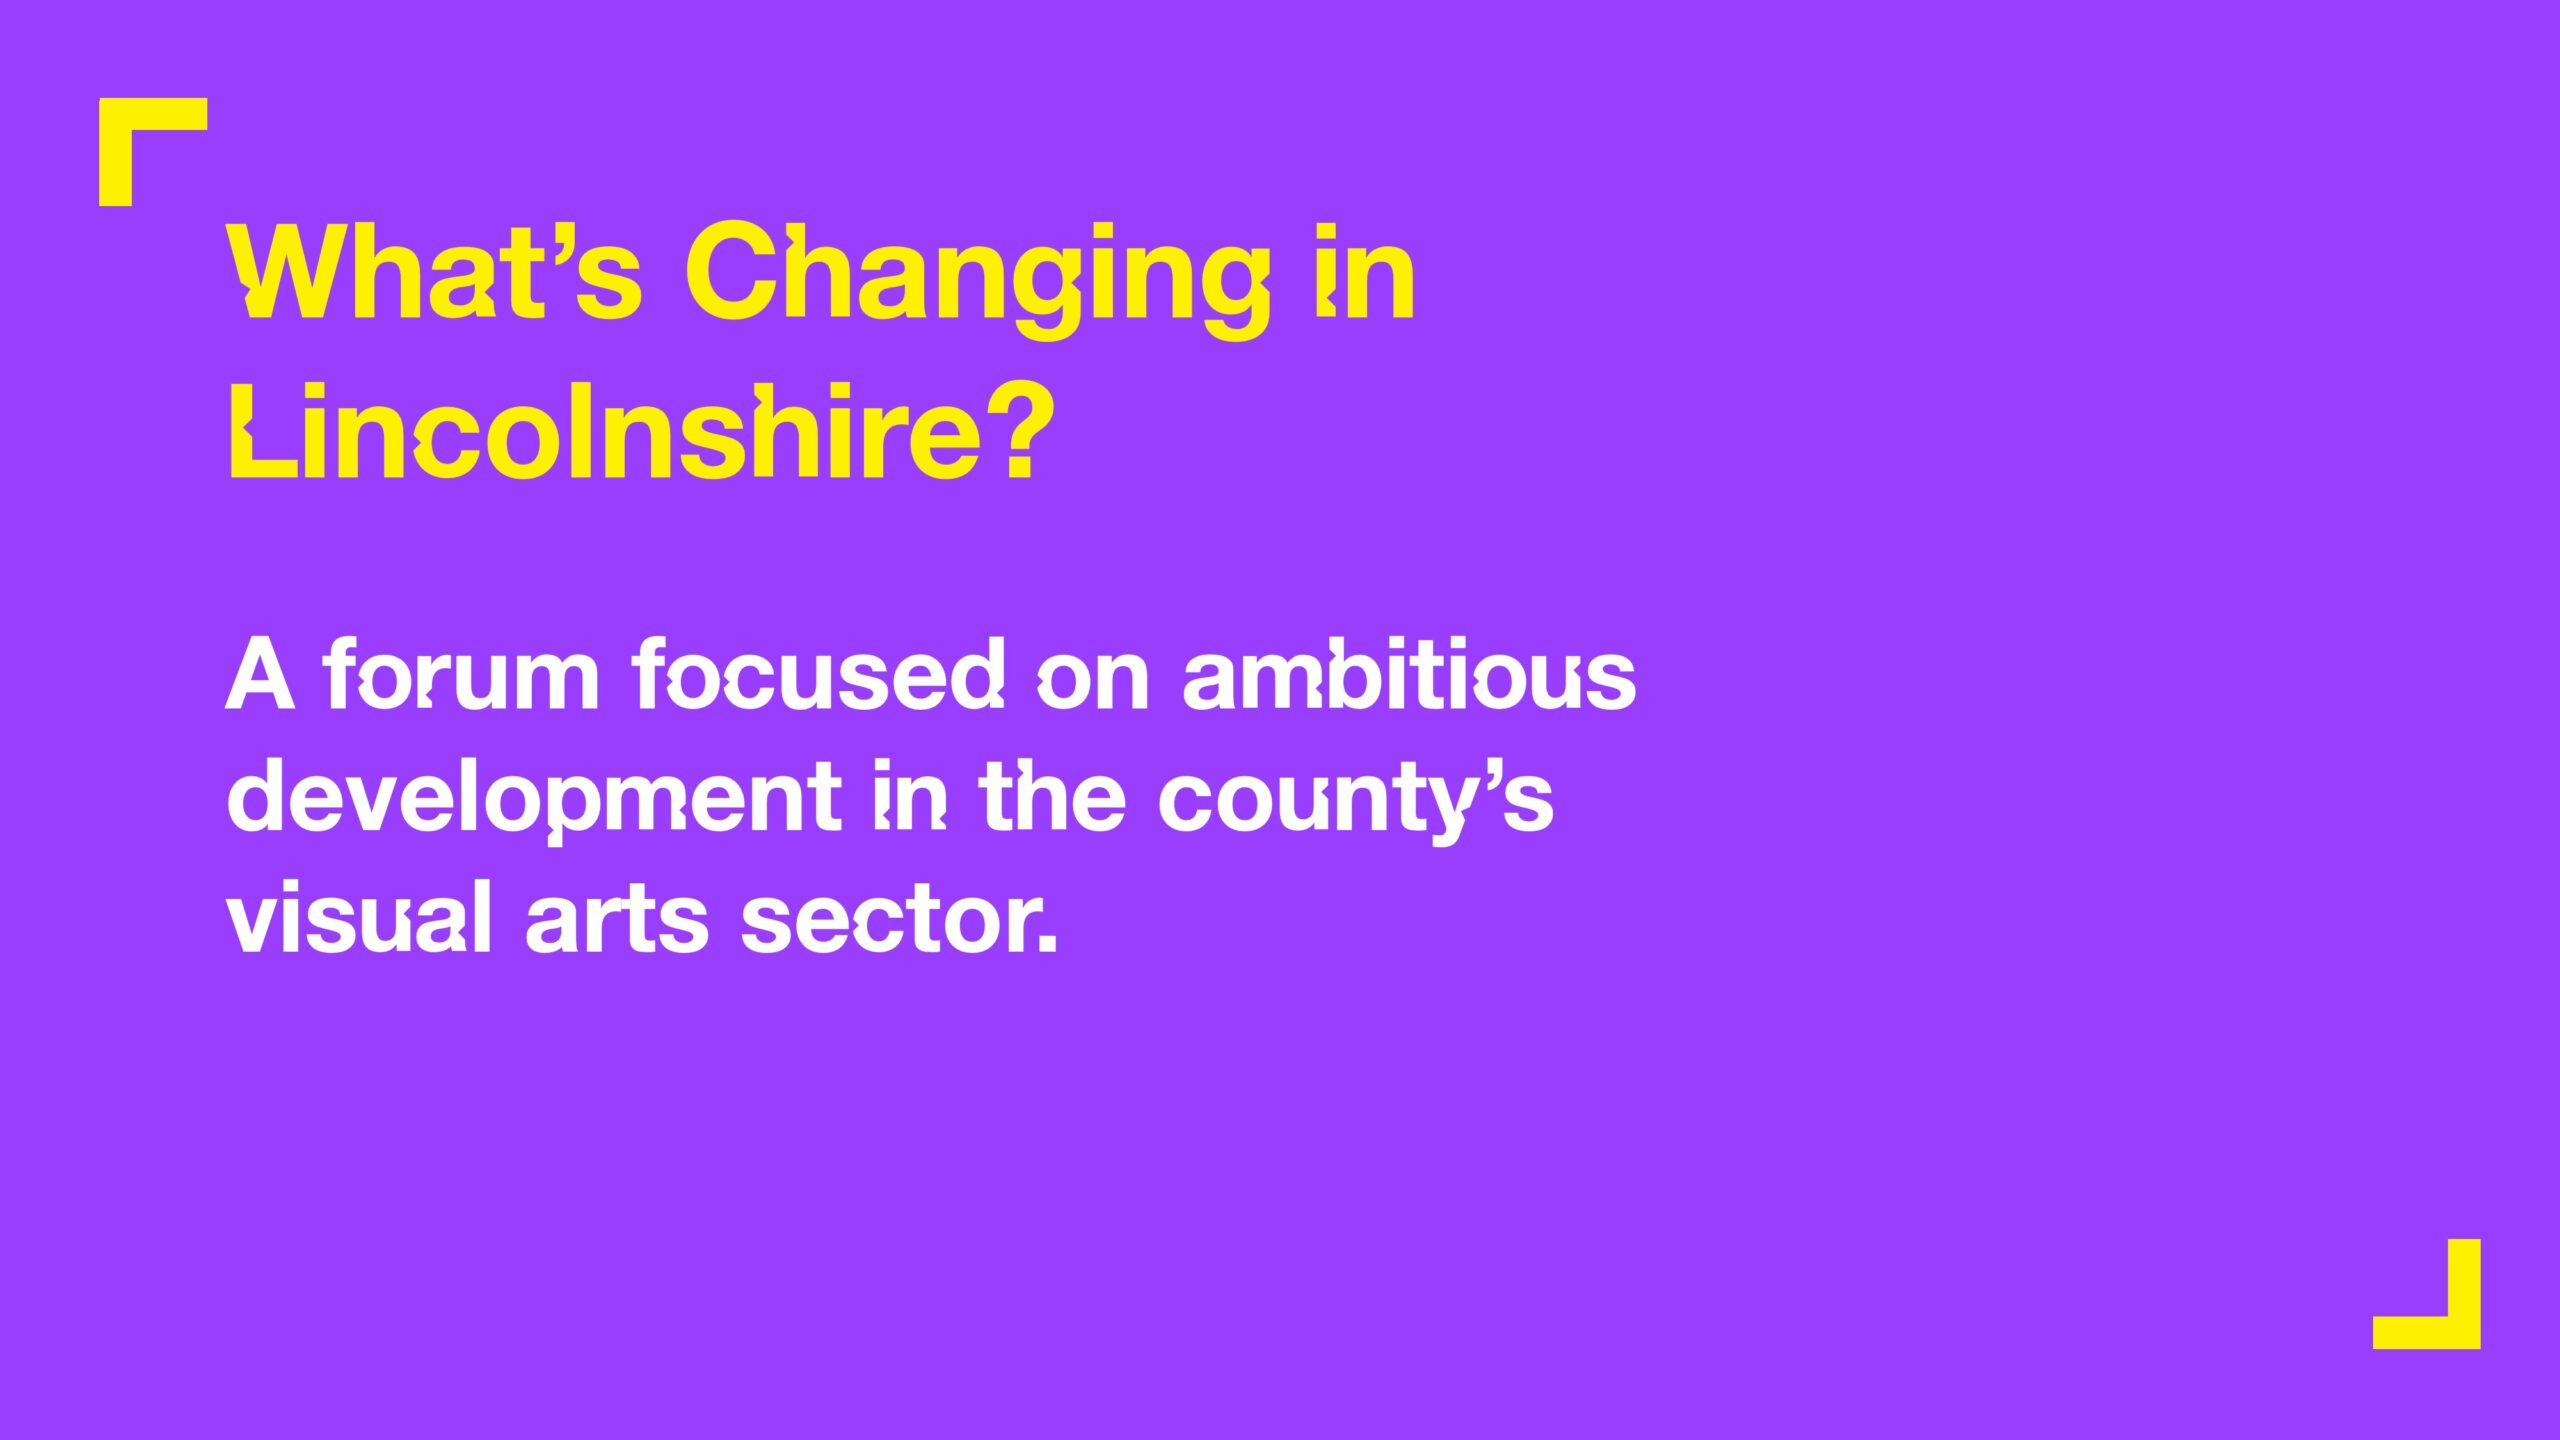 What’s Changing in Lincolnshire – A forum focused on ambitious development in the county’s visual arts sector.